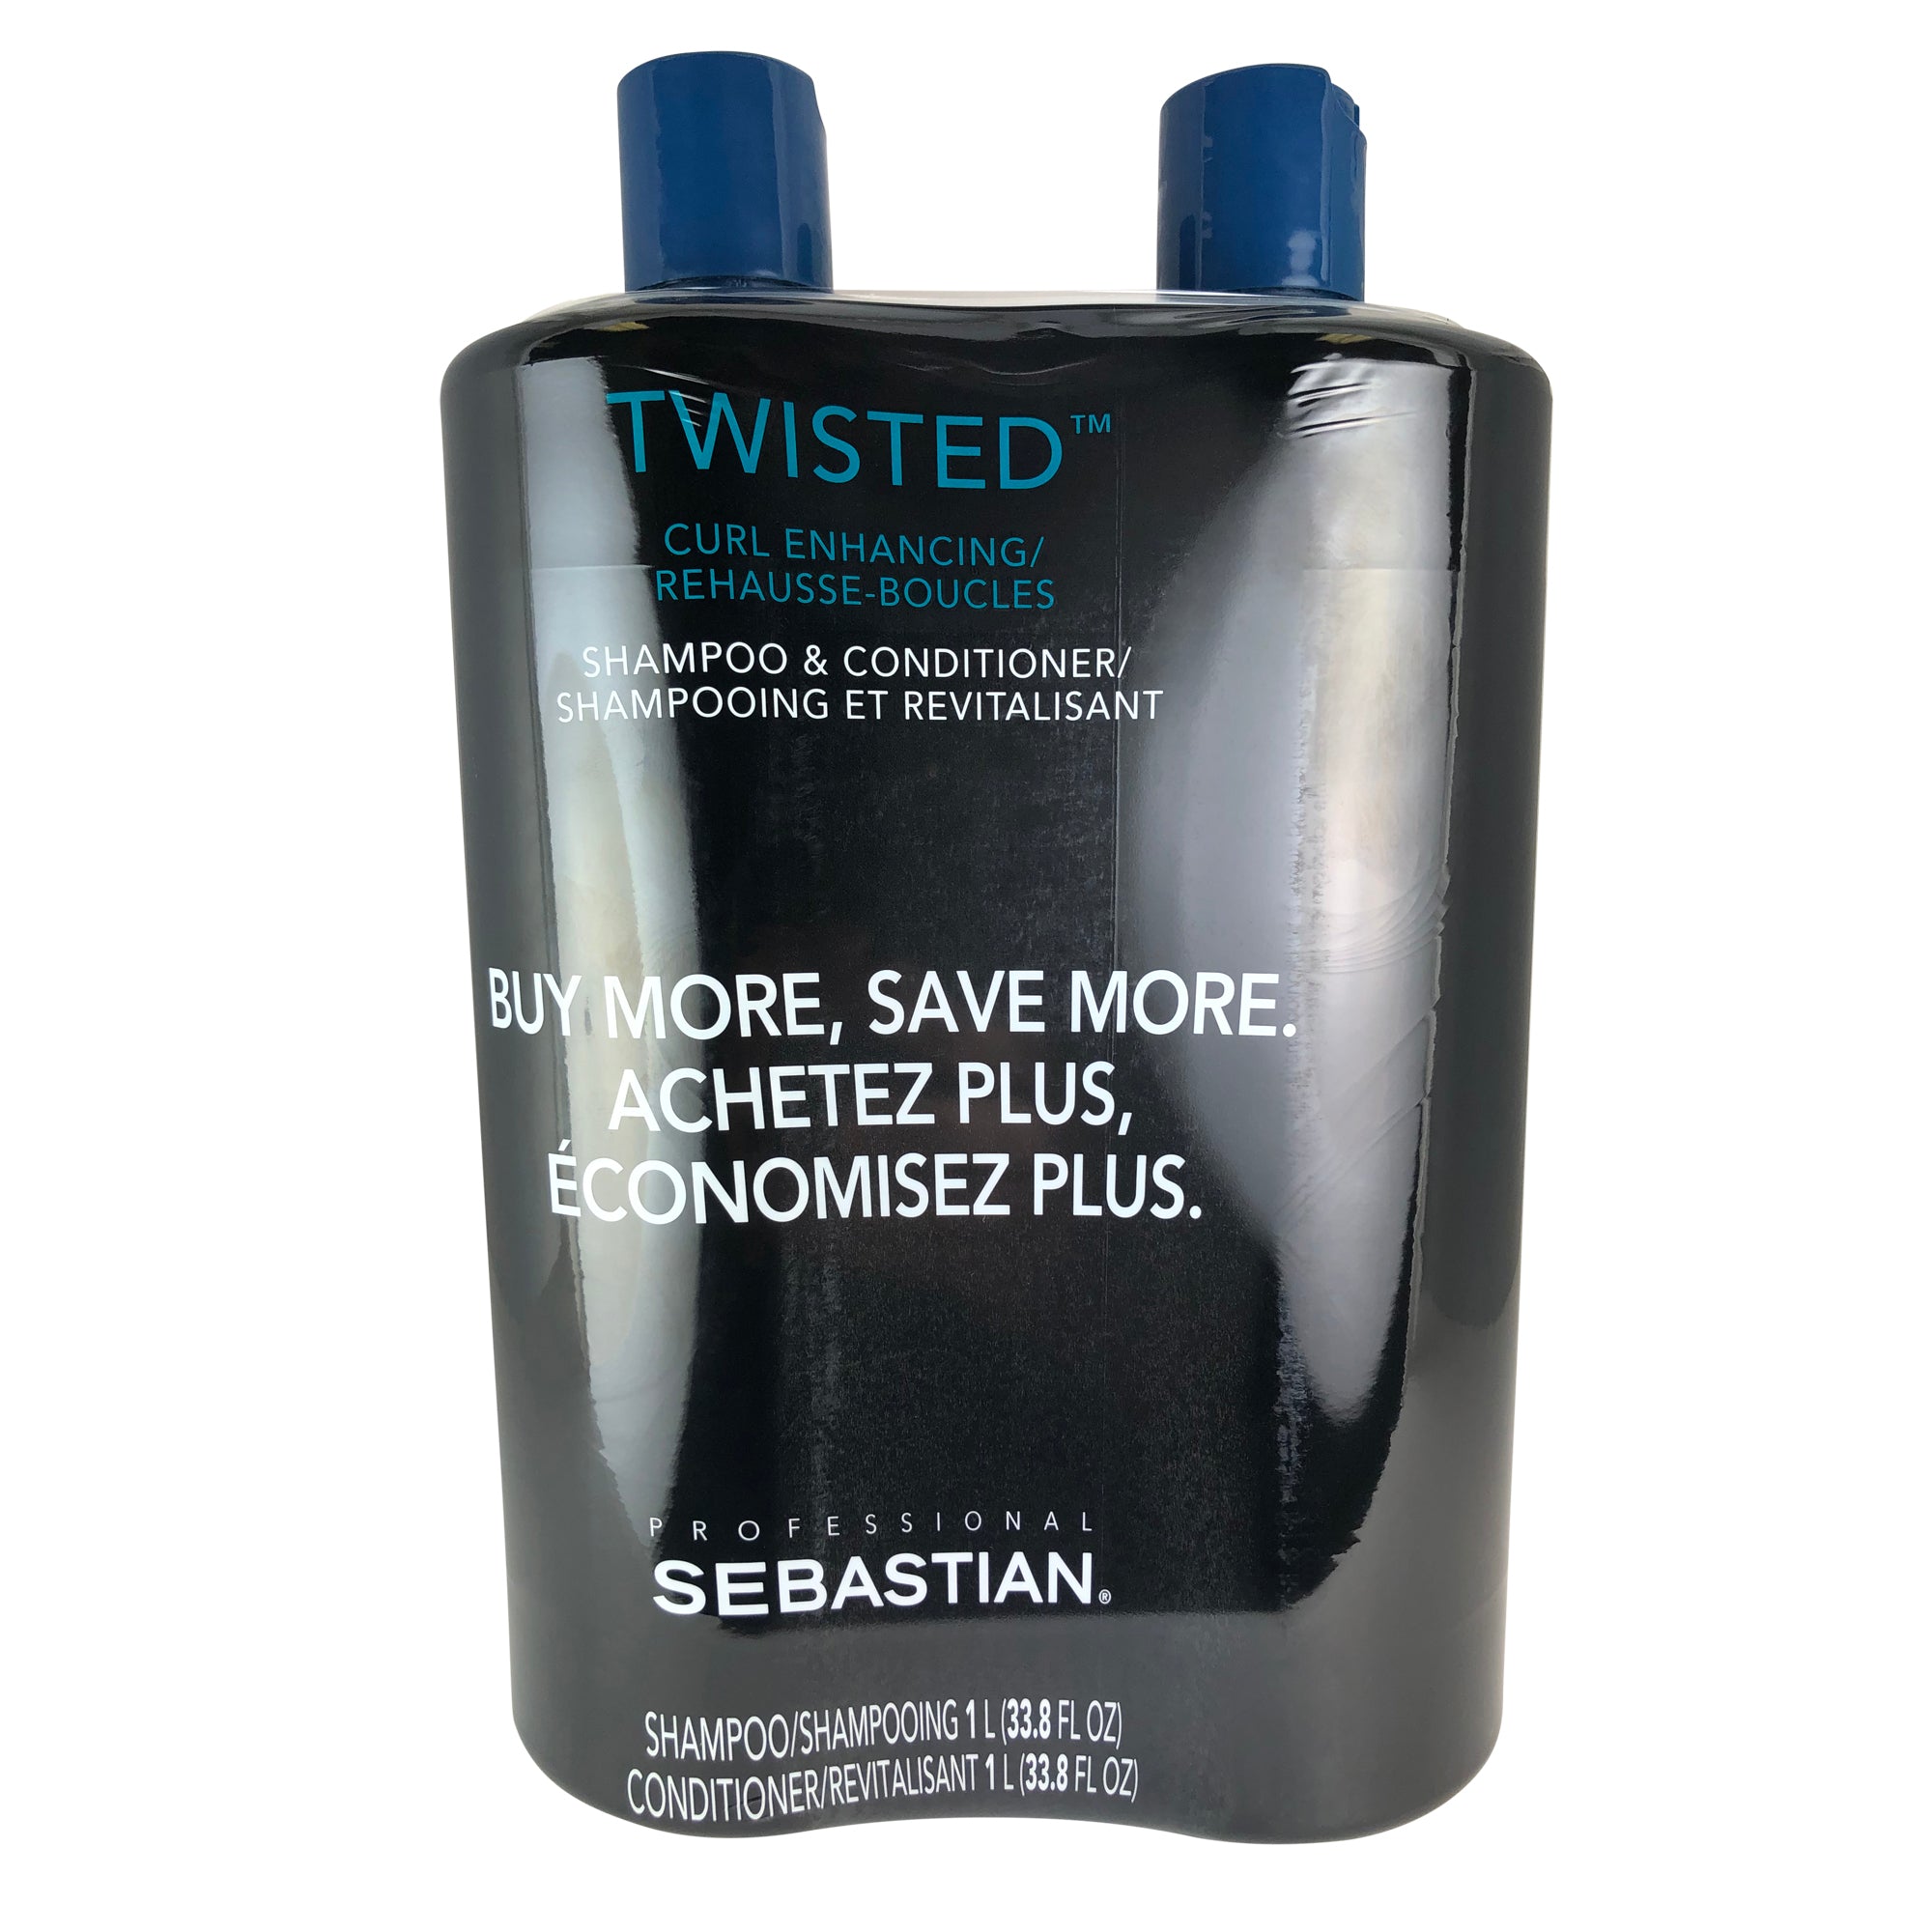 Sebastian Twisted Cleanser Shampoo and Conditioner Liter Duo for Curls 33.8 oz Each